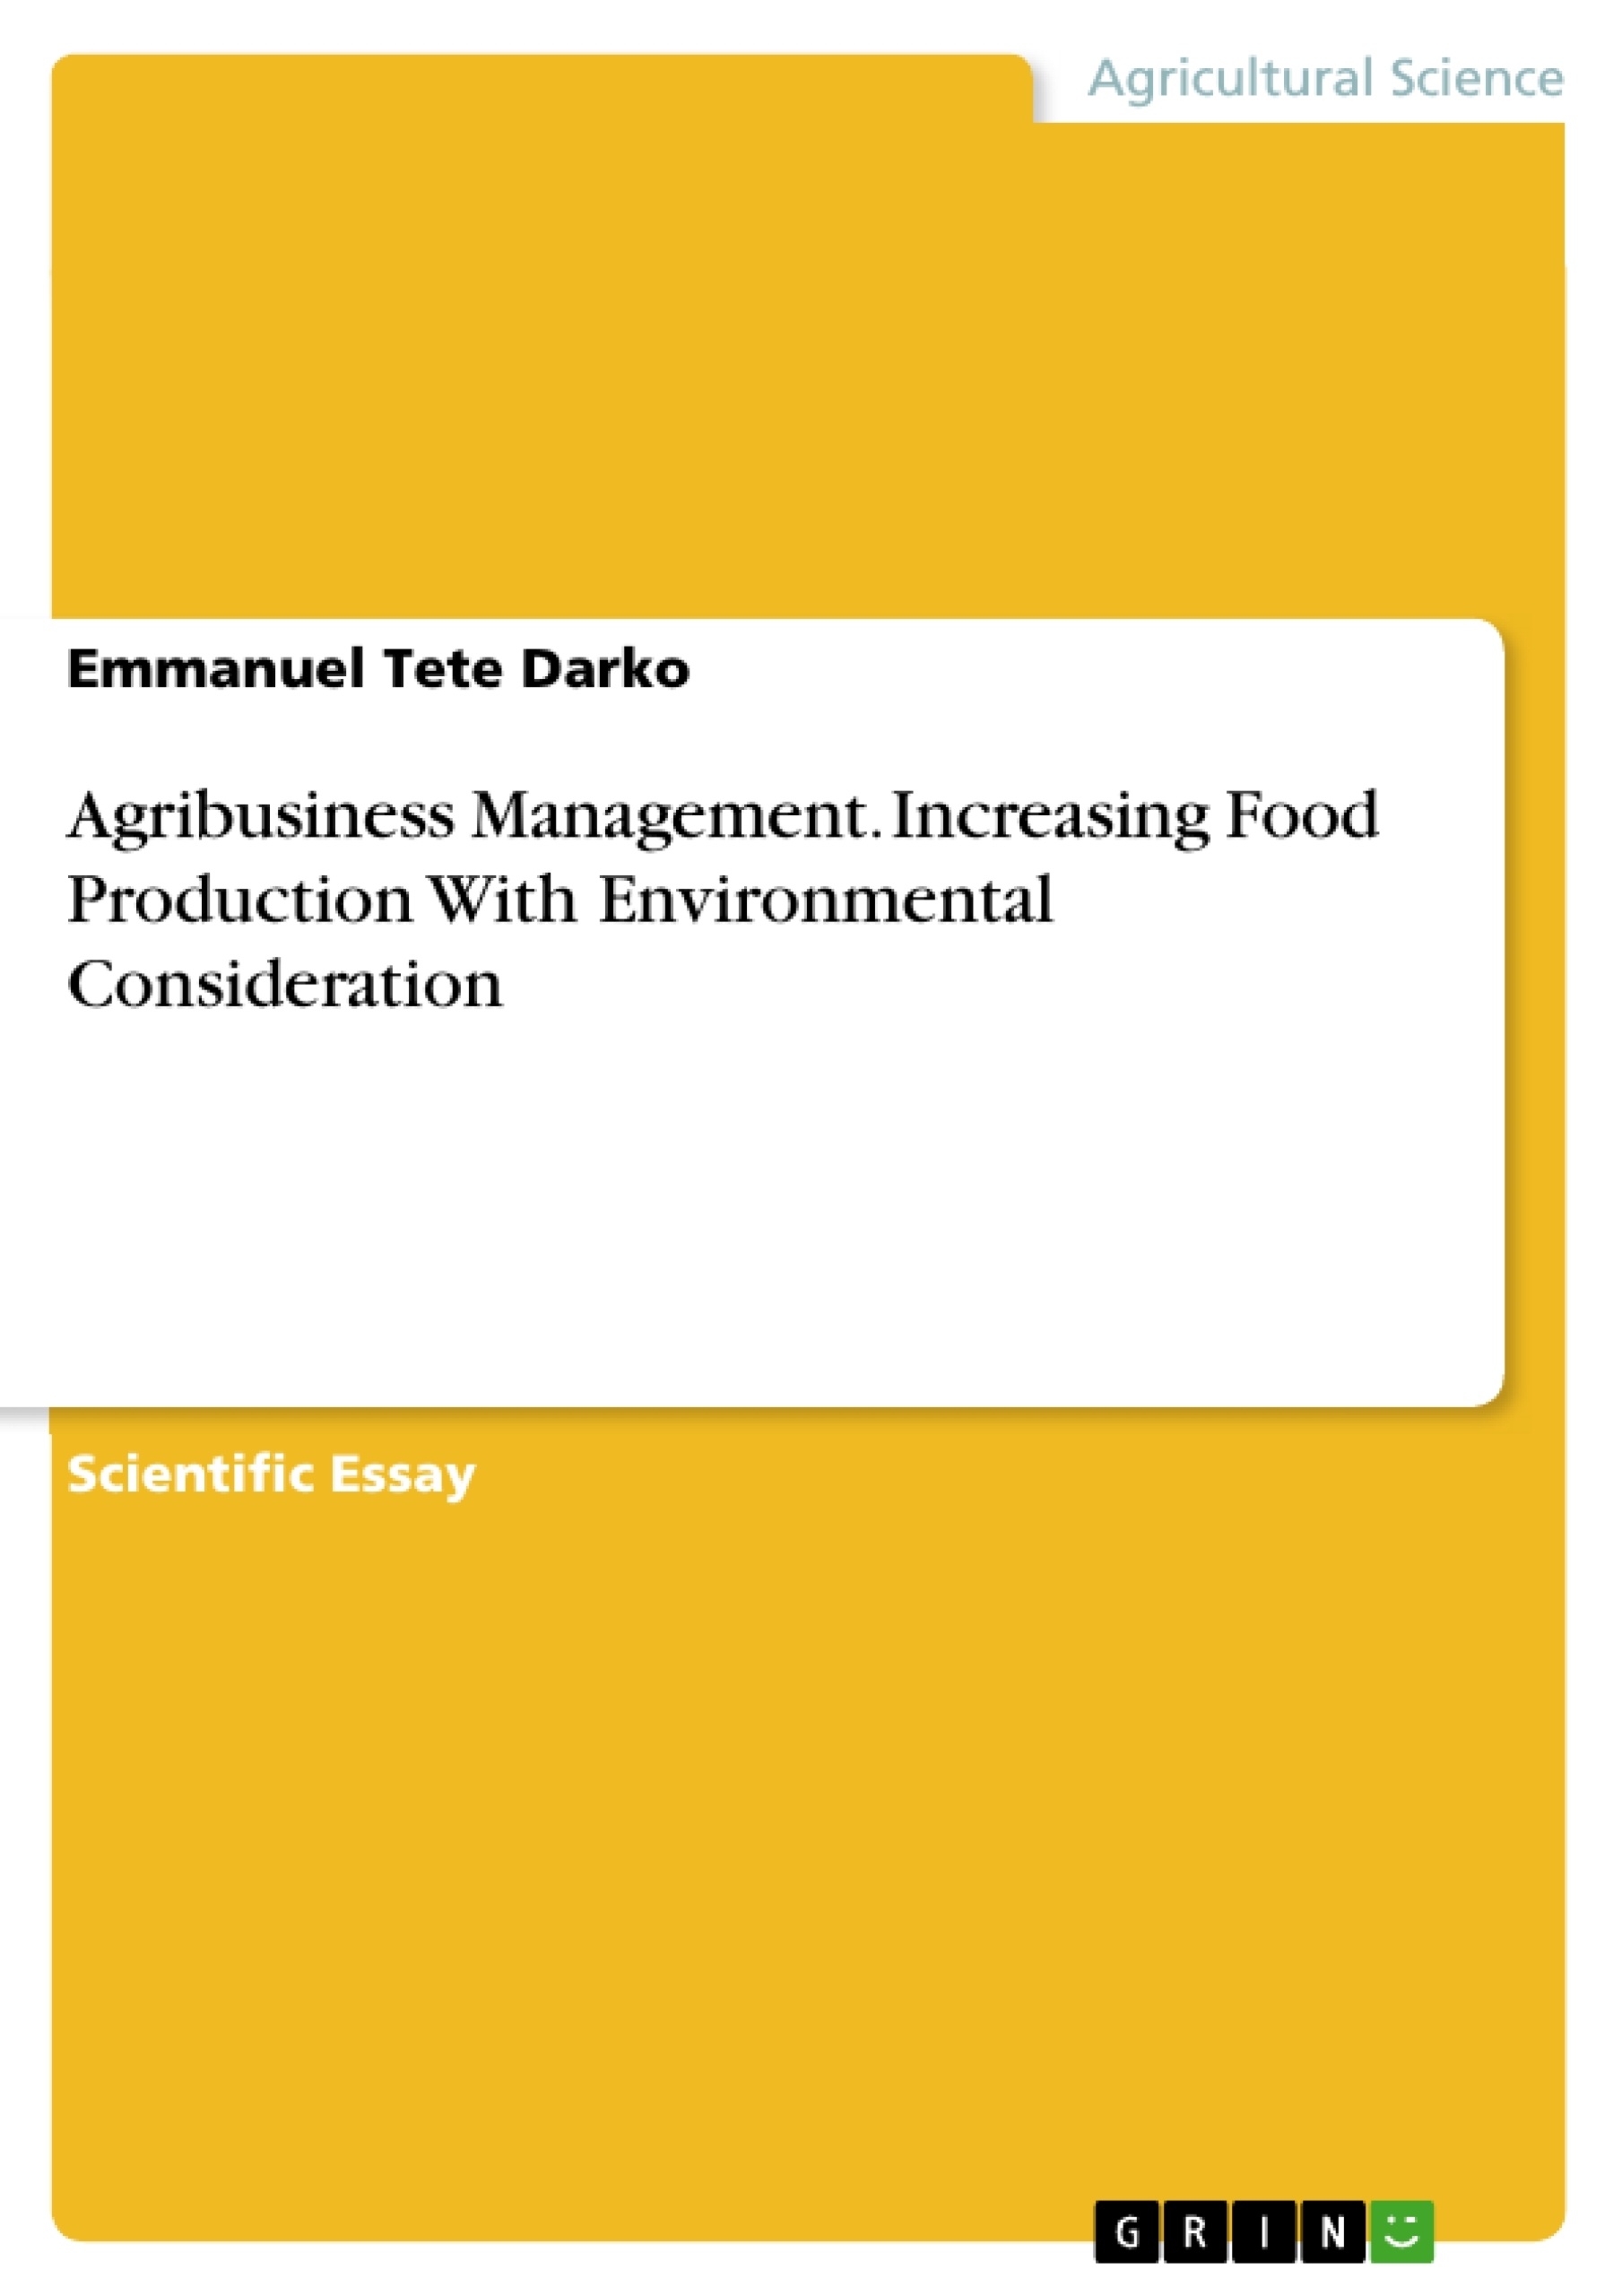 Title: Agribusiness Management. Increasing Food Production With Environmental Consideration